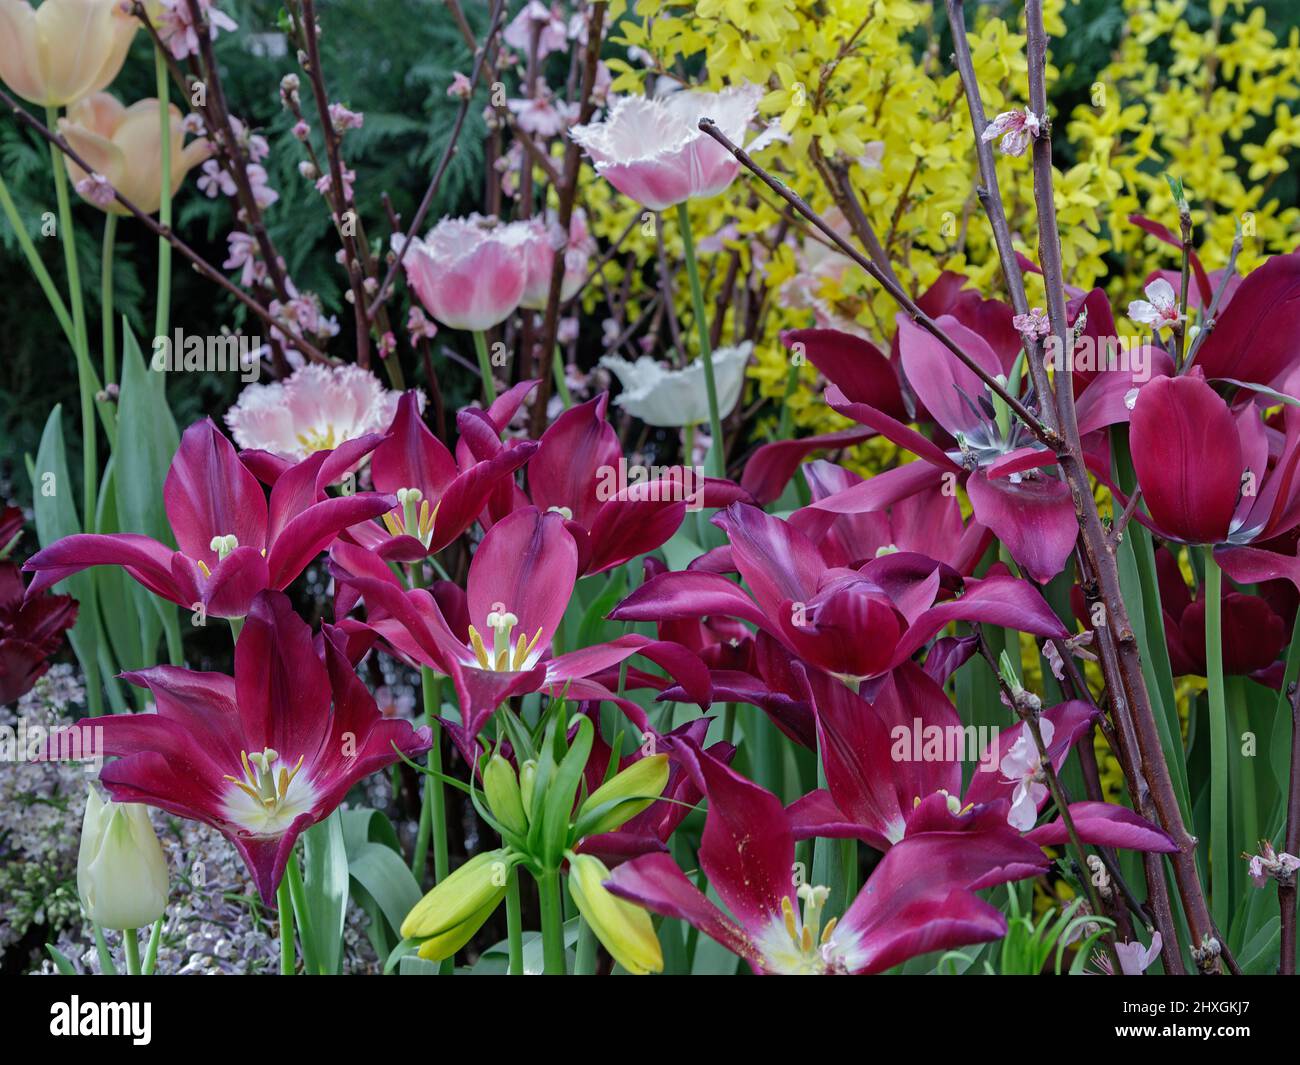 Tulips in soft light on a blurred background with space for text. Tulip Hollands blooms in the greenhouse in spring. Floral banner for florist shop. Stock Photo